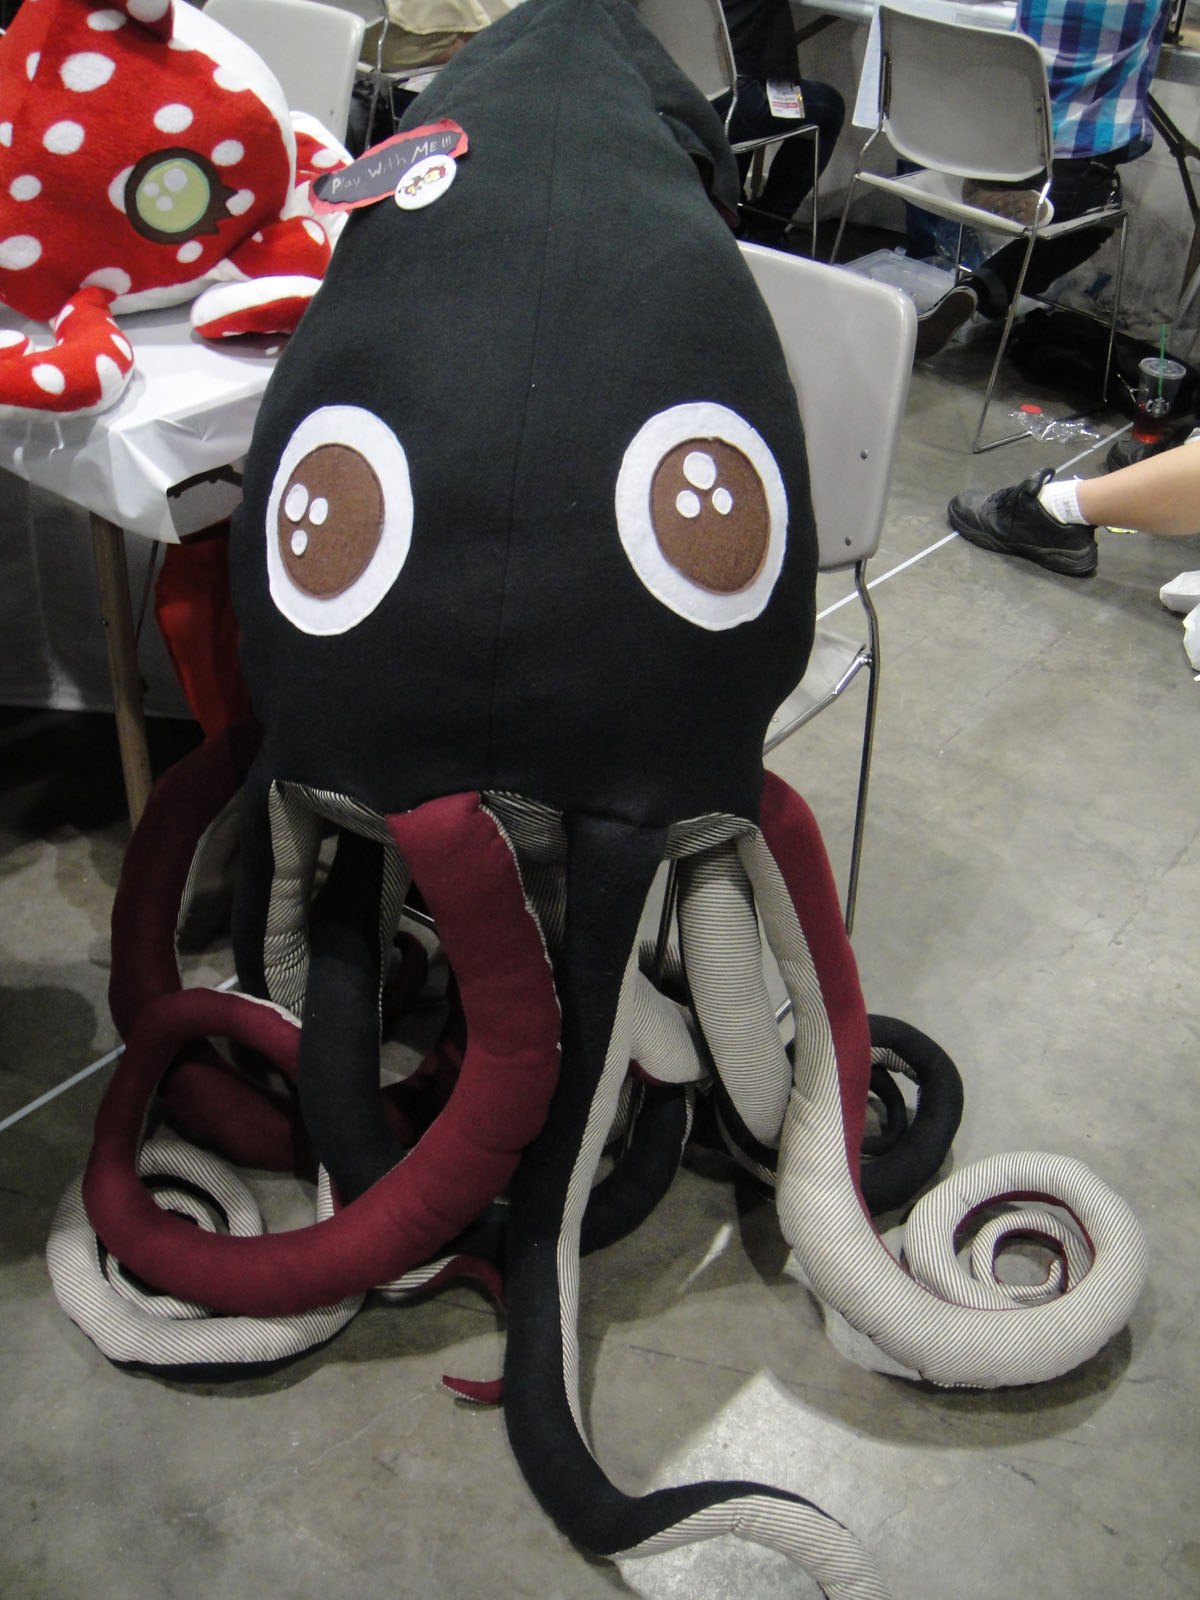 an octo stuffed in black sits on the ground